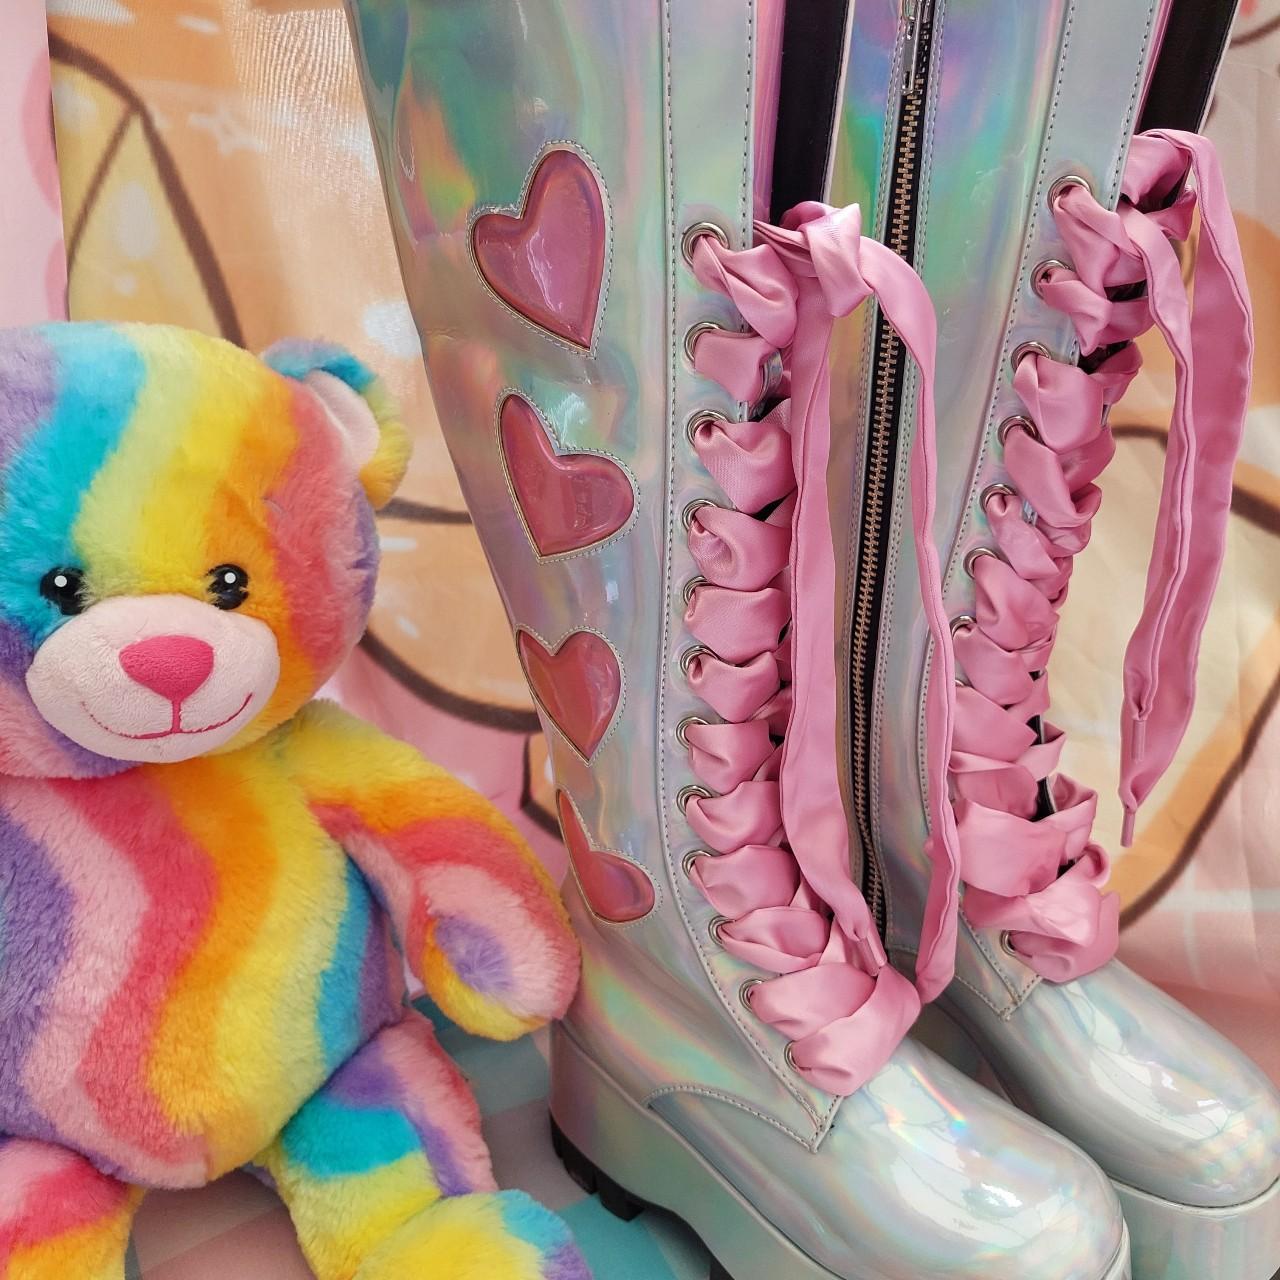 Dollskill Holographic Boots These boots are sold... - Depop